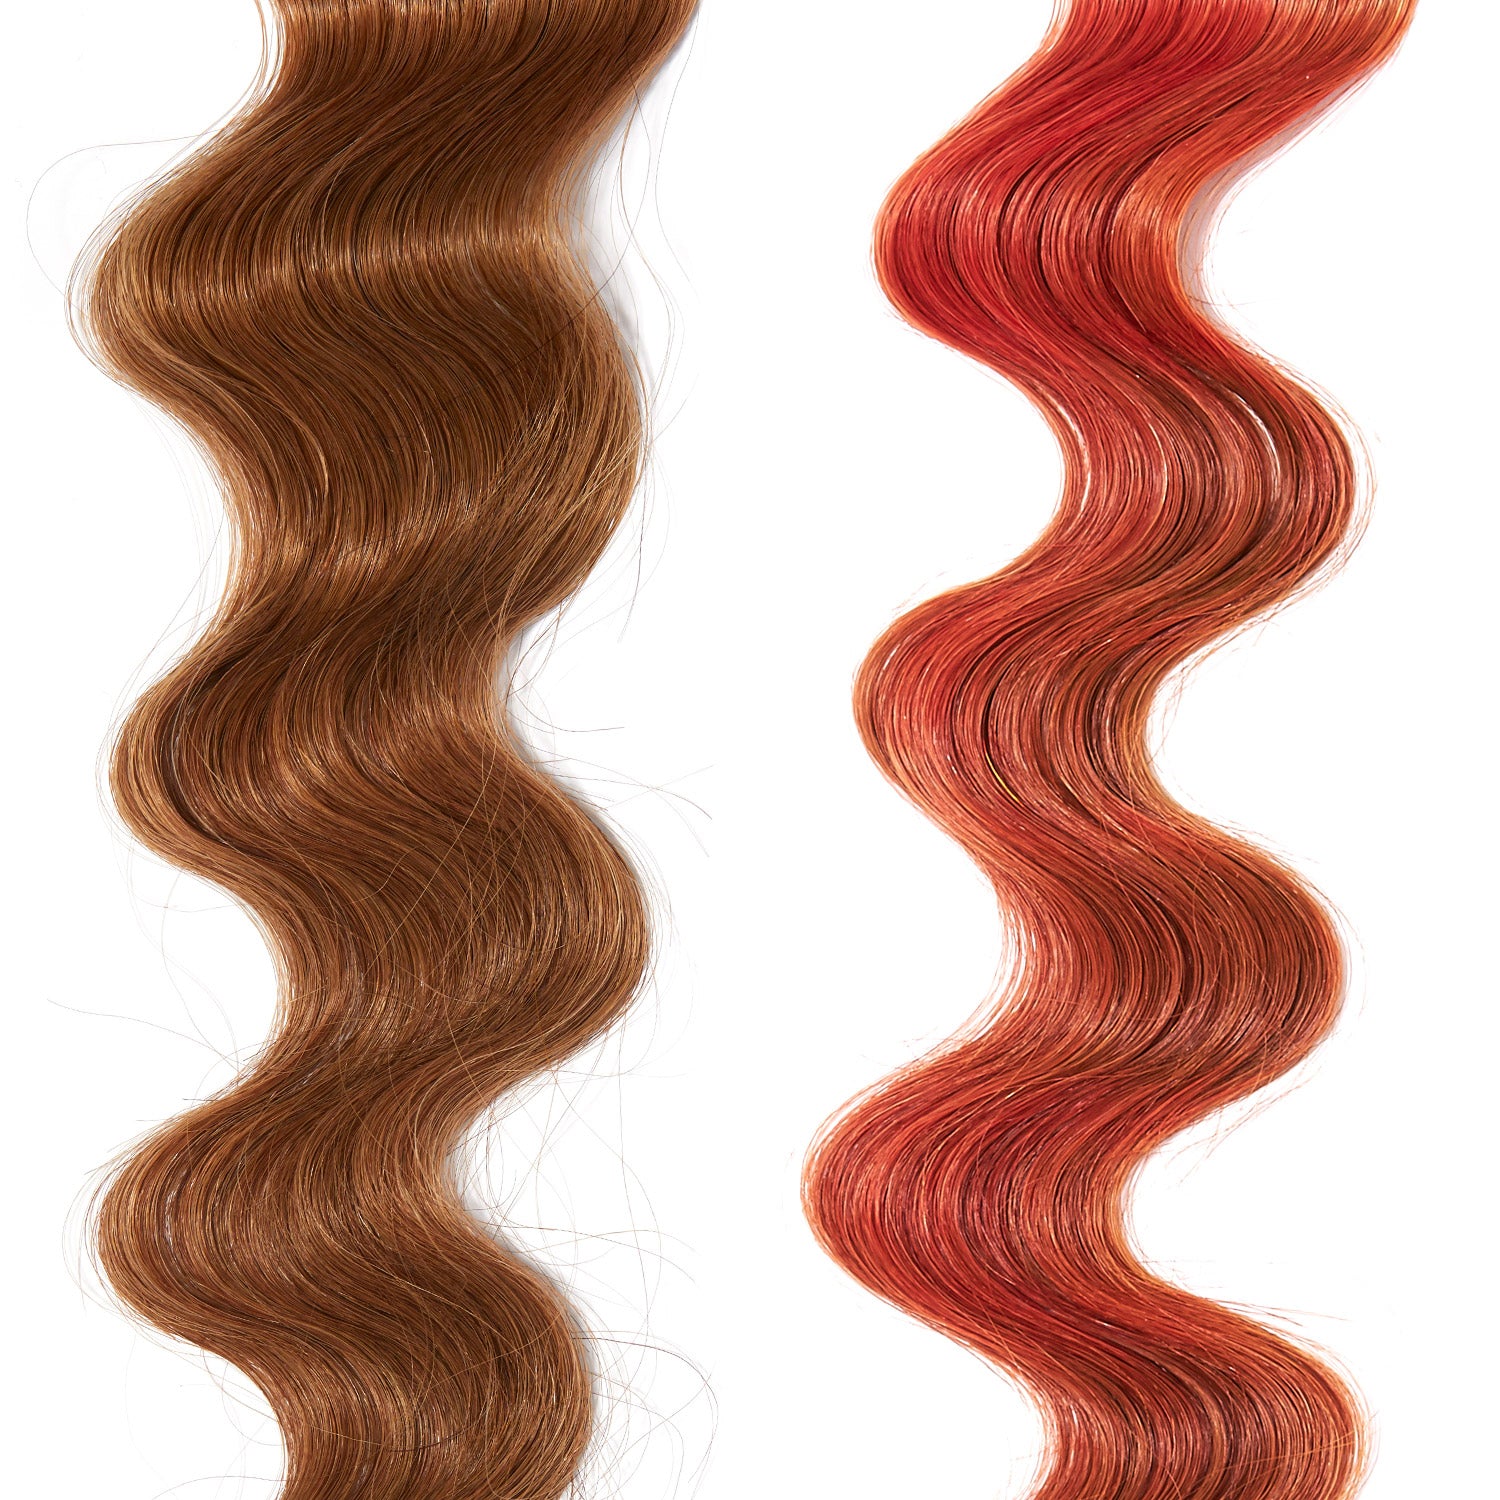 bright orange hair color on red hair